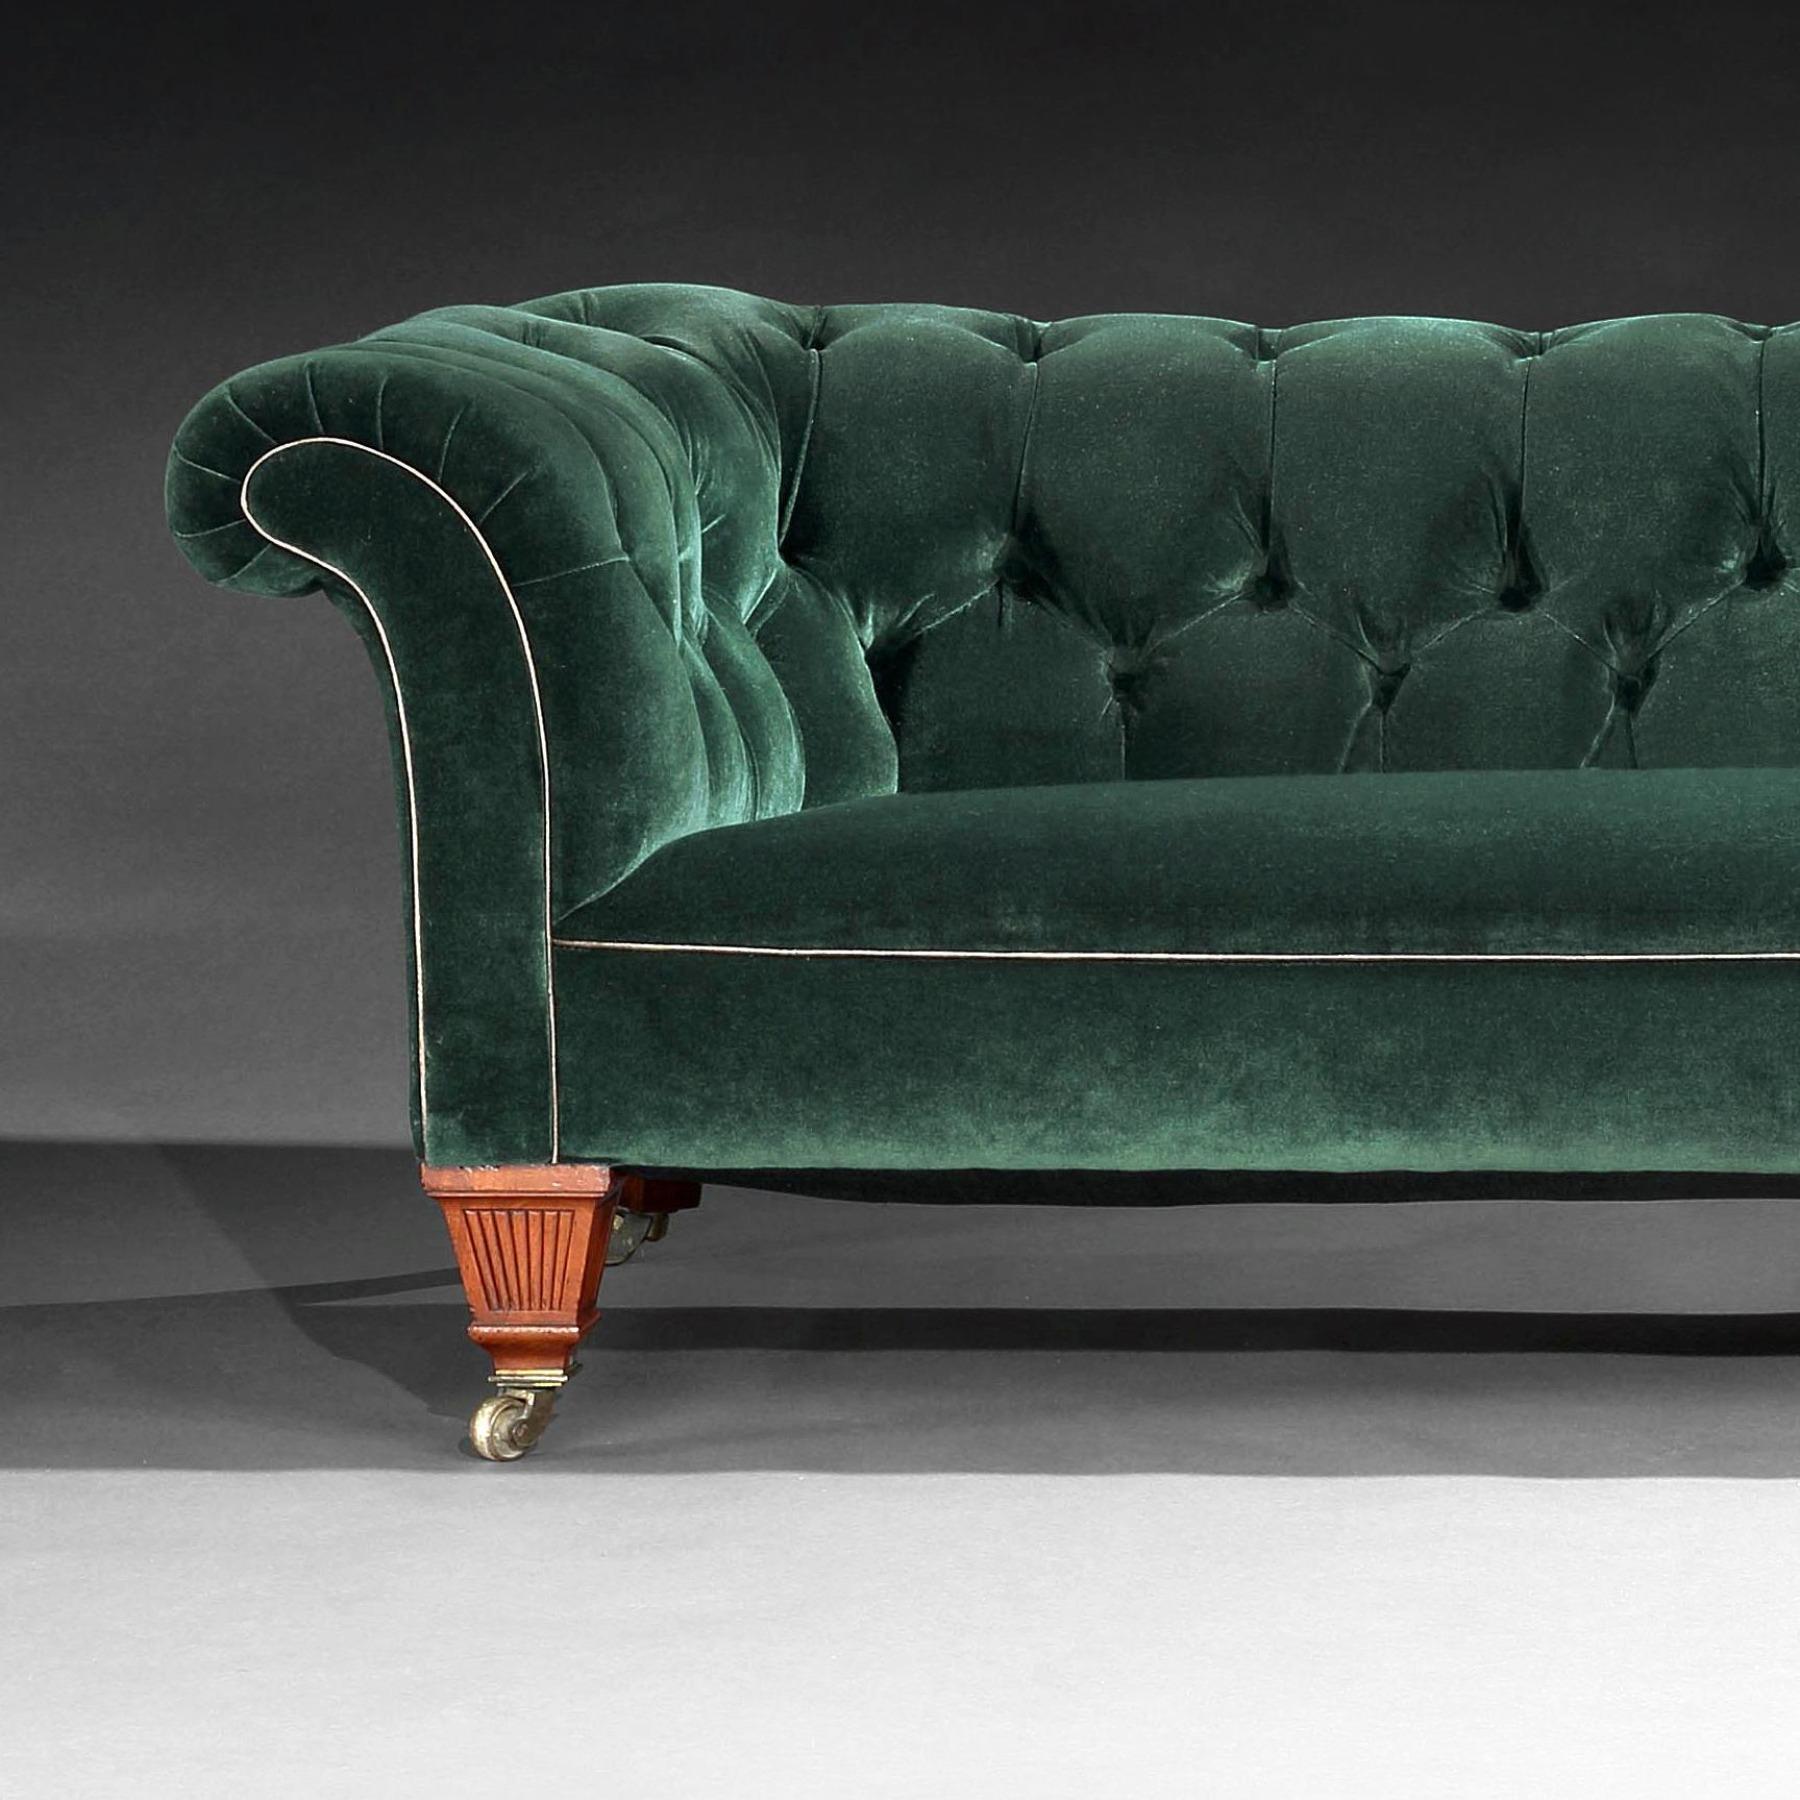 Late 19th Century 19th Century C Hindley and Sons, London Victorian Chesterfield Sofa Upholstered